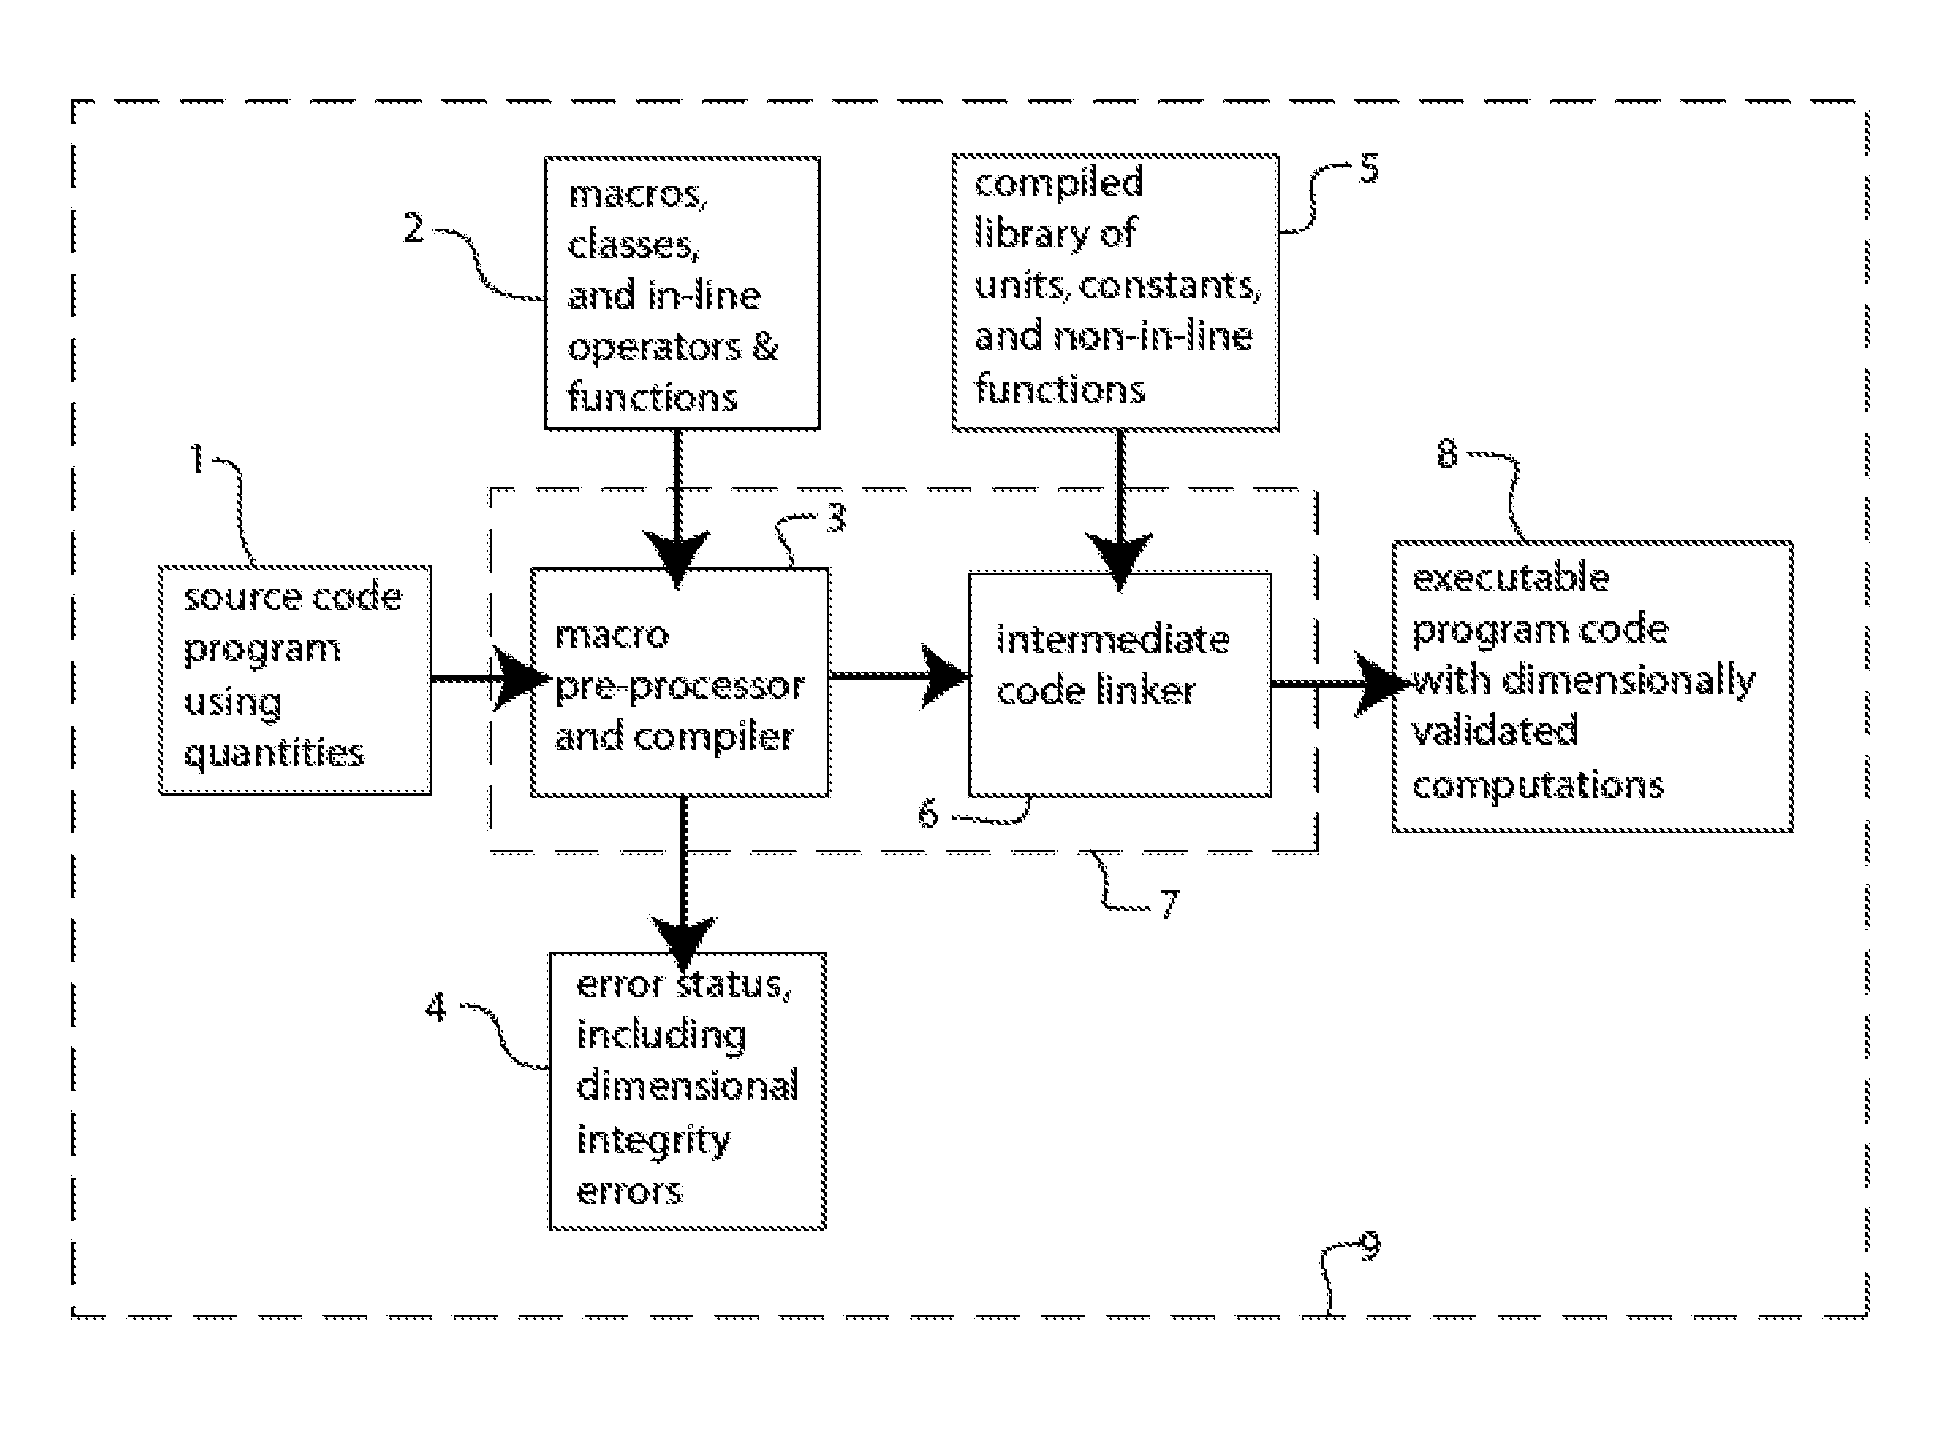 Method and System for Representing Quantitative Properties in a Computer Program and for Validating Dimensional Integrity of Mathematical Expressions